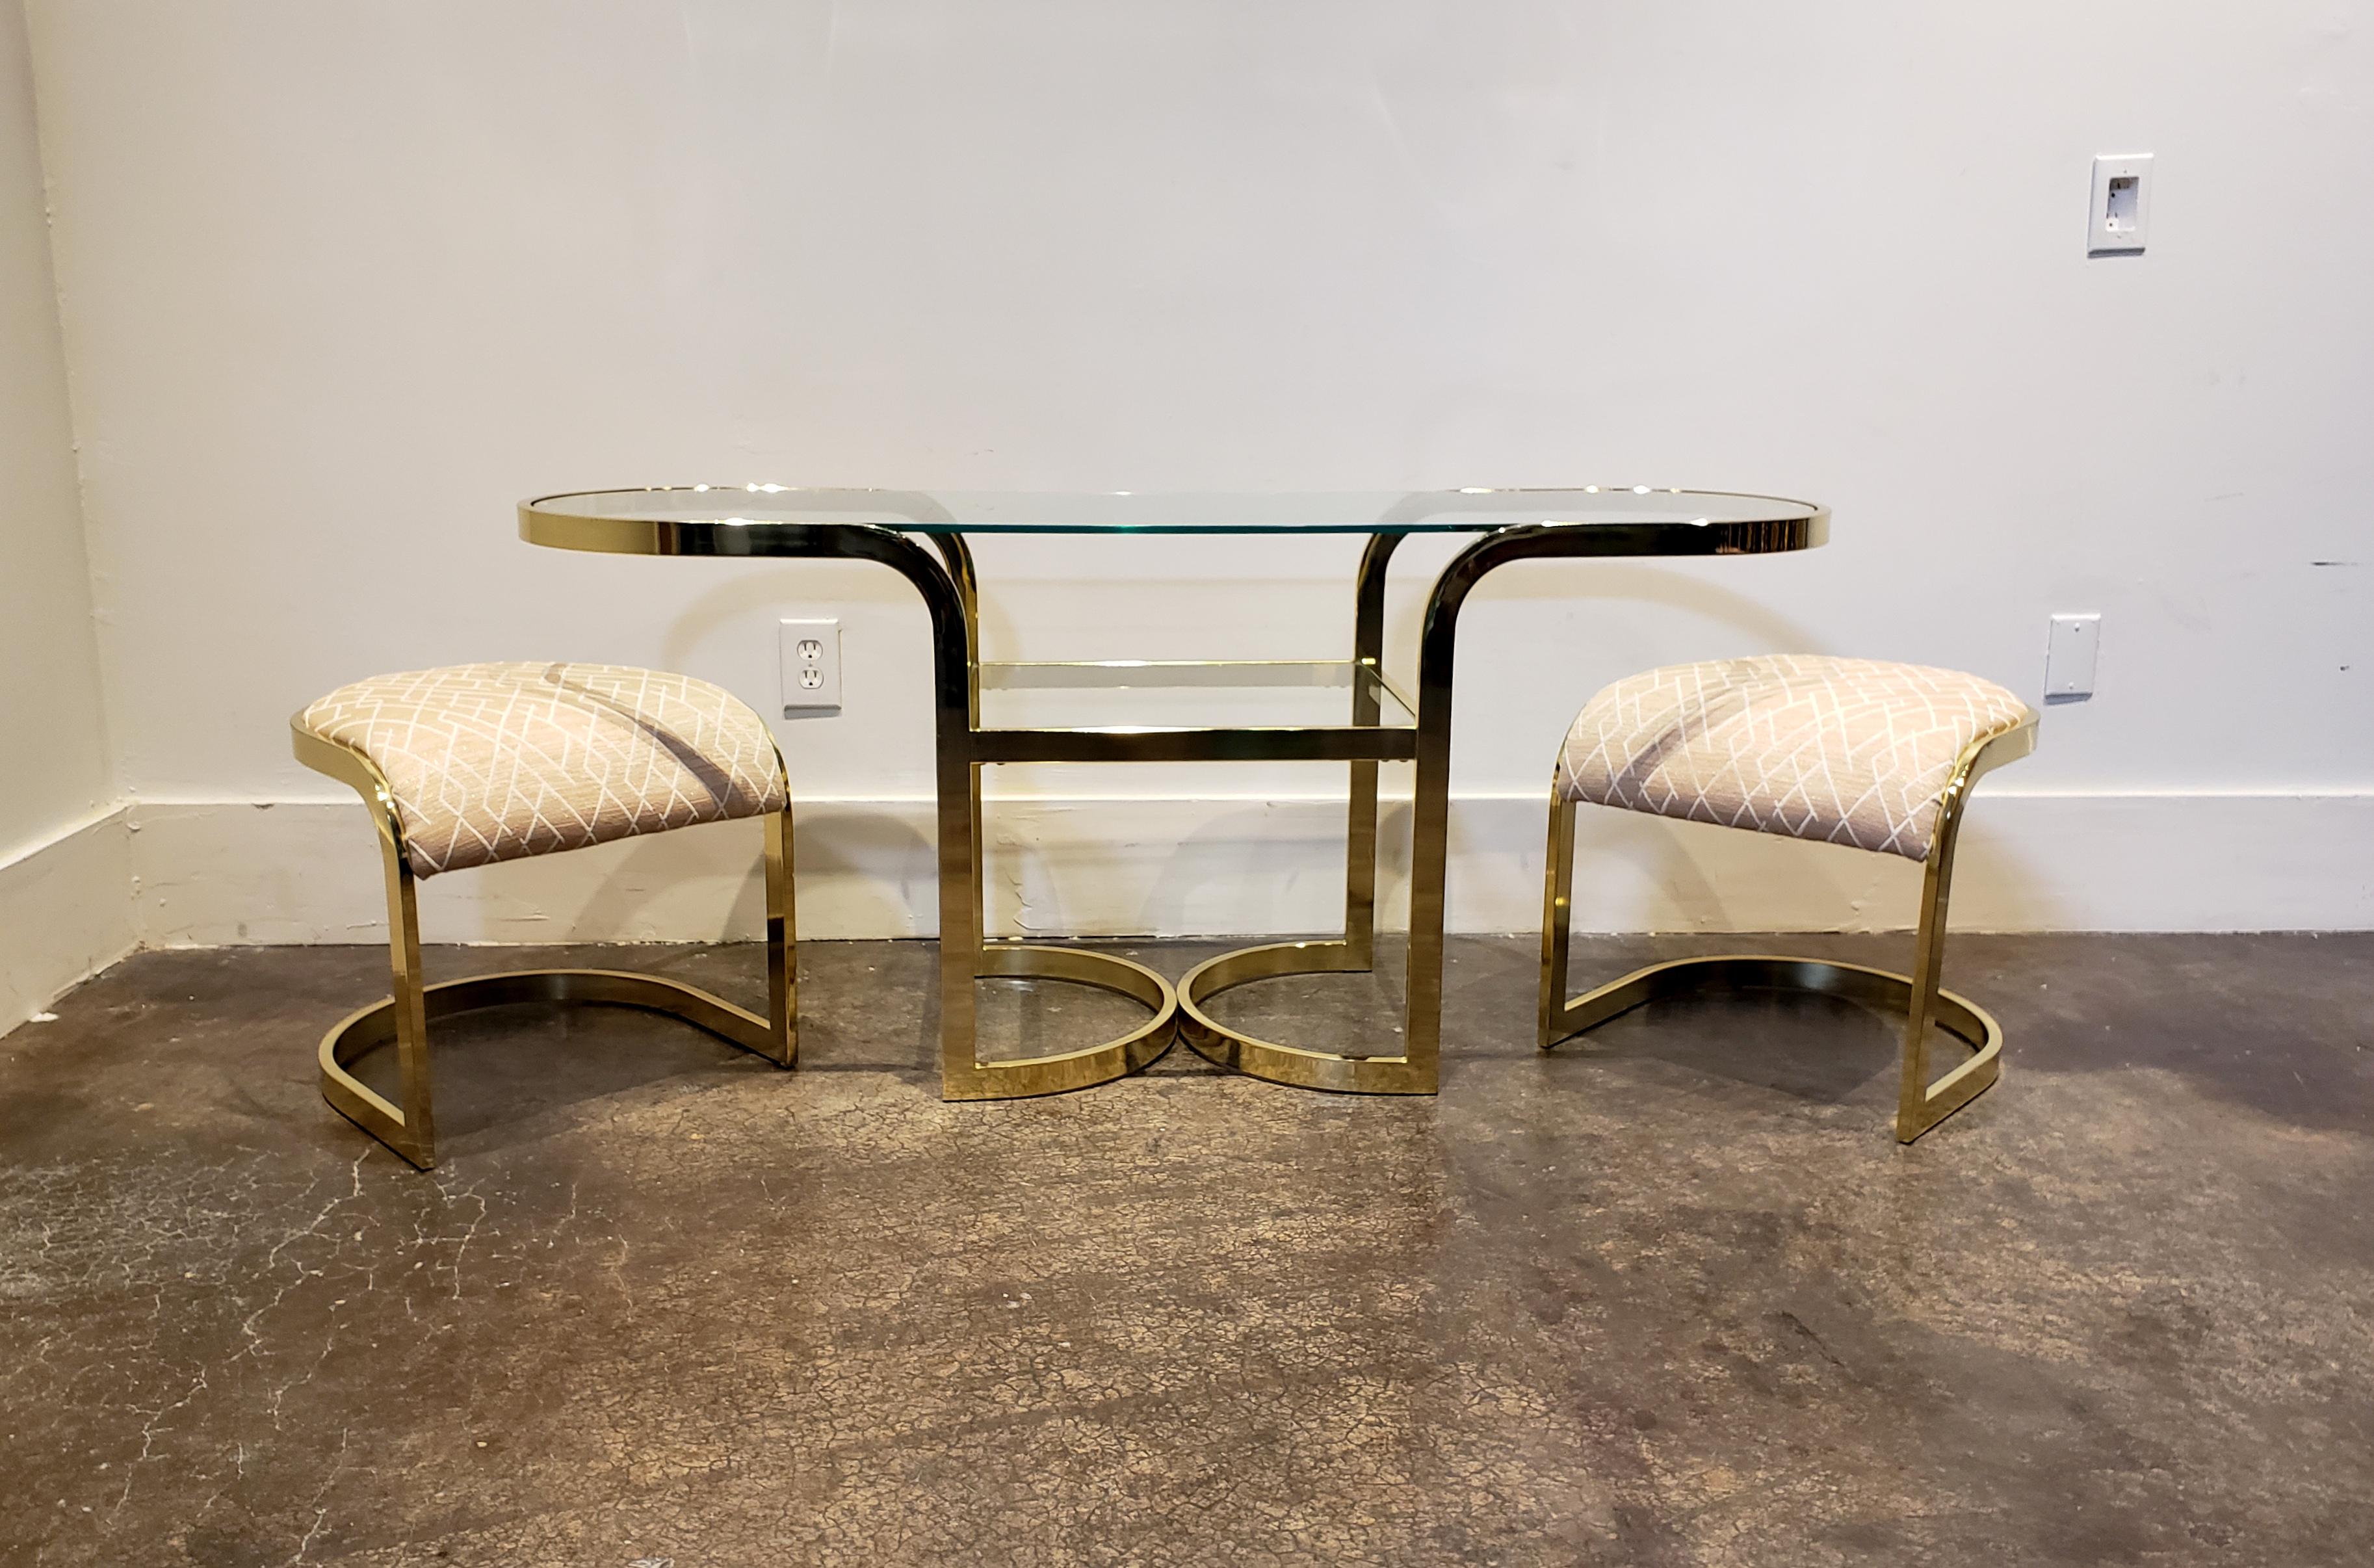 Really cute console table and chairs in brass chrome and glass. Has pair of brass stools in pink fabric that fit neatly underneath. Versatile design can be used as a console table, vanity, desk or cafe table. 

Measures: Table dimensions: 59.75